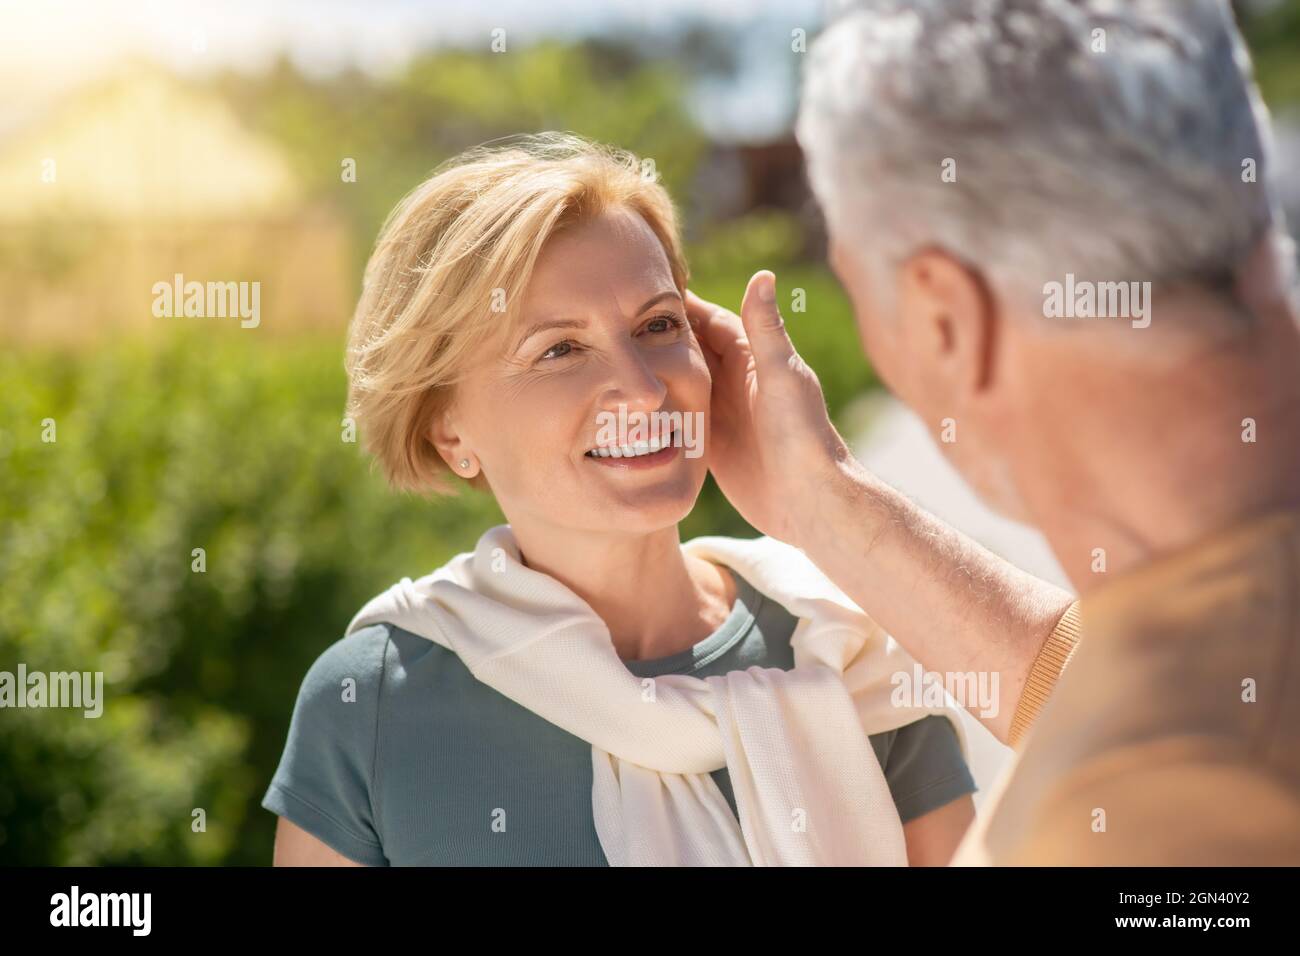 Loving husband showing affection to his wife Stock Photo